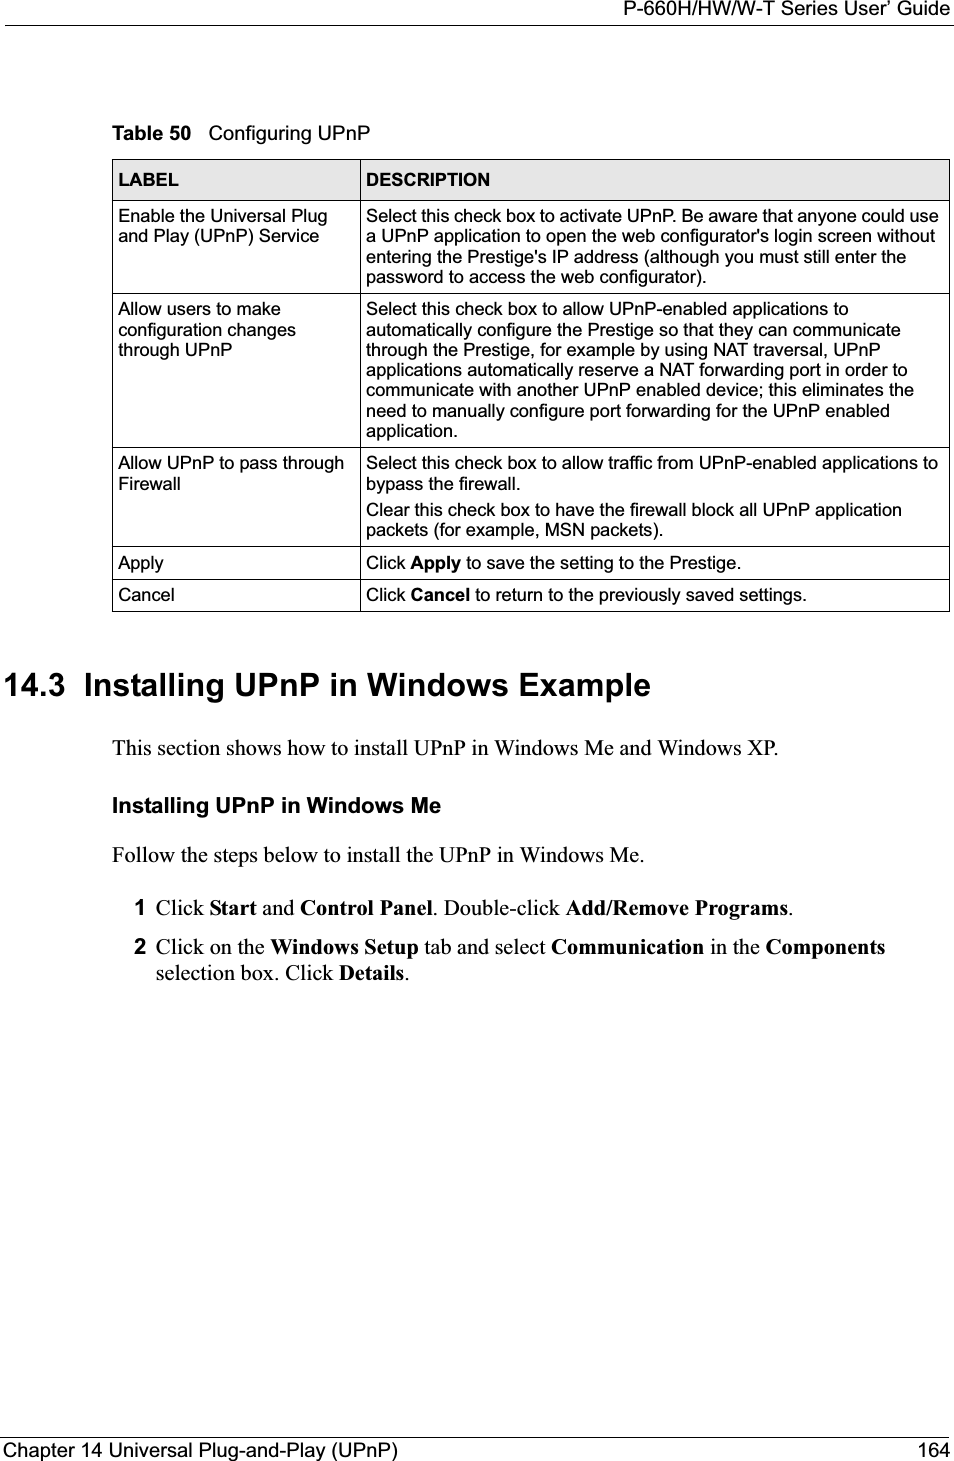 P-660H/HW/W-T Series User’ GuideChapter 14 Universal Plug-and-Play (UPnP) 16414.3  Installing UPnP in Windows ExampleThis section shows how to install UPnP in Windows Me and Windows XP.  Installing UPnP in Windows MeFollow the steps below to install the UPnP in Windows Me. 1Click Start and Control Panel. Double-click Add/Remove Programs.2Click on the Windows Setup tab and select Communication in the Componentsselection box. Click Details.Table 50   Configuring UPnPLABEL DESCRIPTIONEnable the Universal Plug and Play (UPnP) Service Select this check box to activate UPnP. Be aware that anyone could use a UPnP application to open the web configurator&apos;s login screen without entering the Prestige&apos;s IP address (although you must still enter the password to access the web configurator).Allow users to make configuration changes through UPnPSelect this check box to allow UPnP-enabled applications to automatically configure the Prestige so that they can communicate through the Prestige, for example by using NAT traversal, UPnP applications automatically reserve a NAT forwarding port in order to communicate with another UPnP enabled device; this eliminates the need to manually configure port forwarding for the UPnP enabled application. Allow UPnP to pass through FirewallSelect this check box to allow traffic from UPnP-enabled applications to bypass the firewall. Clear this check box to have the firewall block all UPnP application packets (for example, MSN packets).Apply Click Apply to save the setting to the Prestige.Cancel Click Cancel to return to the previously saved settings.